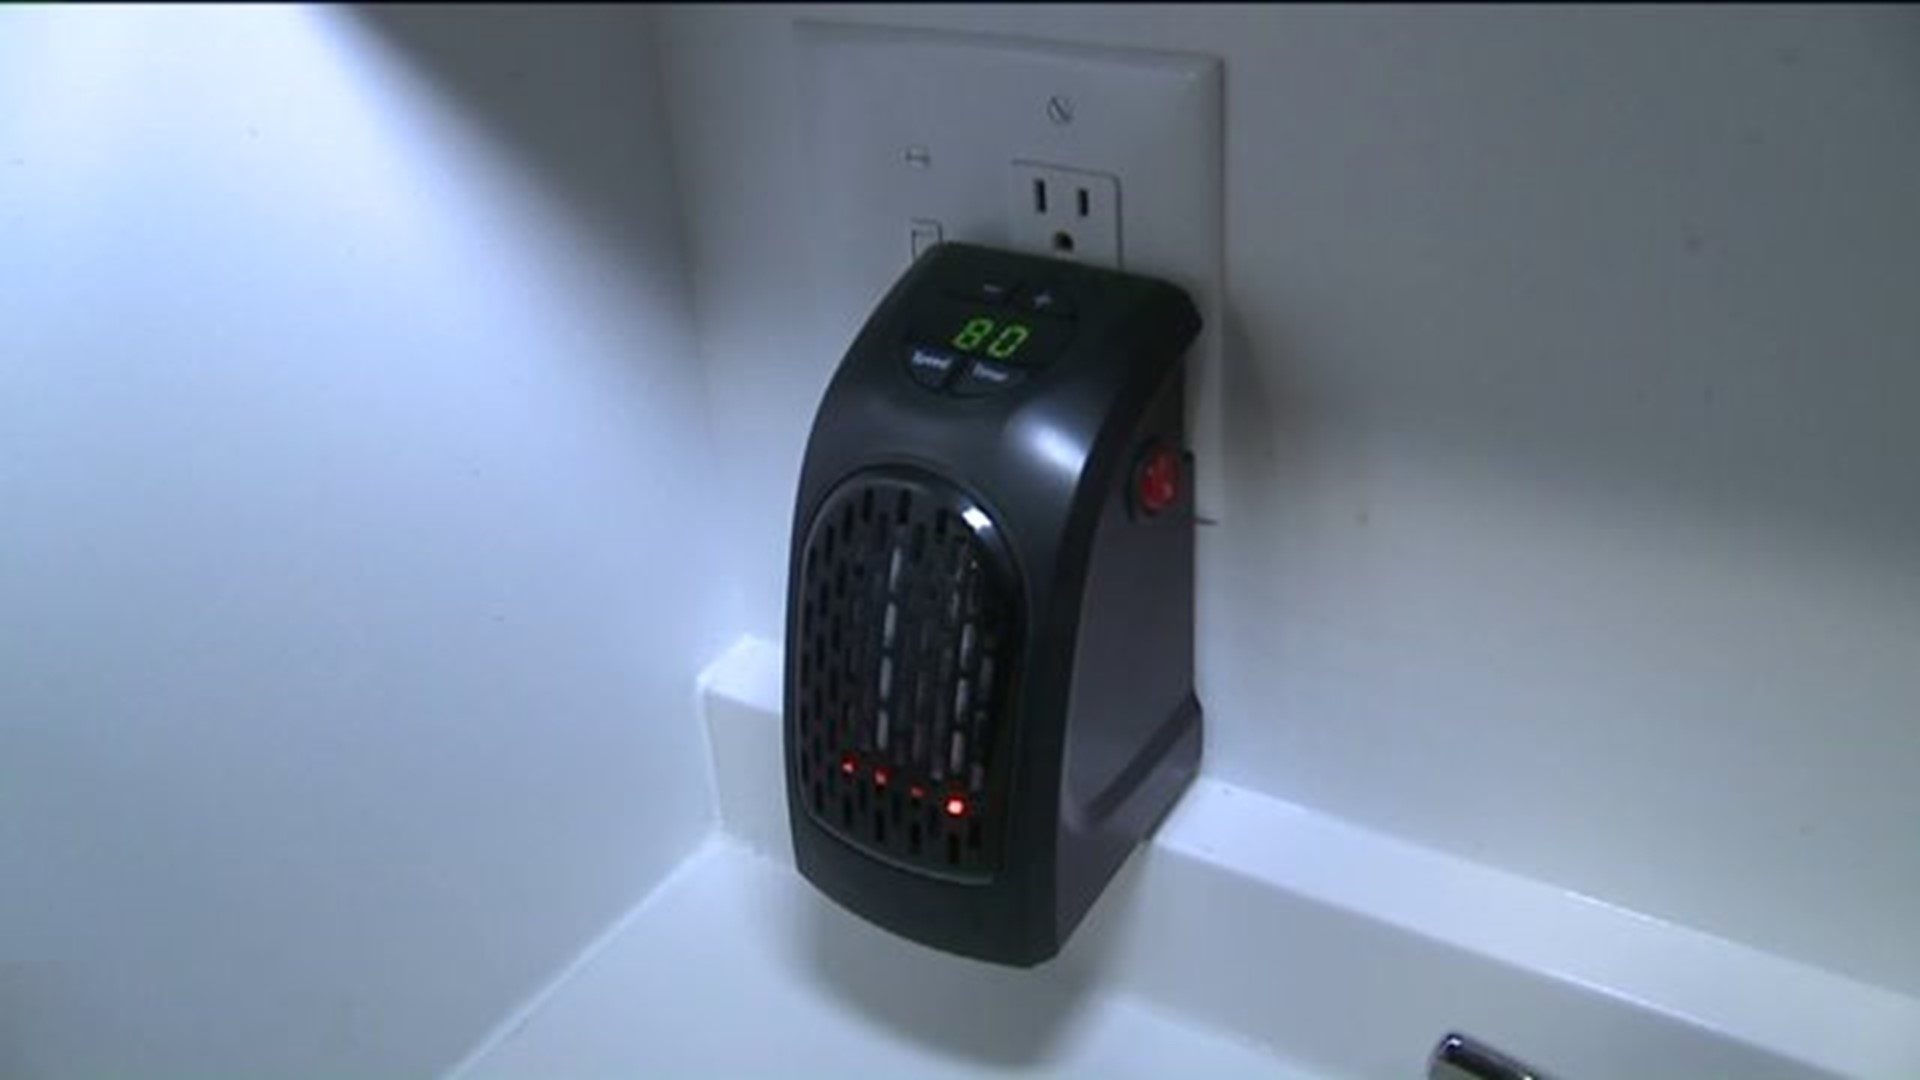 Does It Really Work: Handy Heater